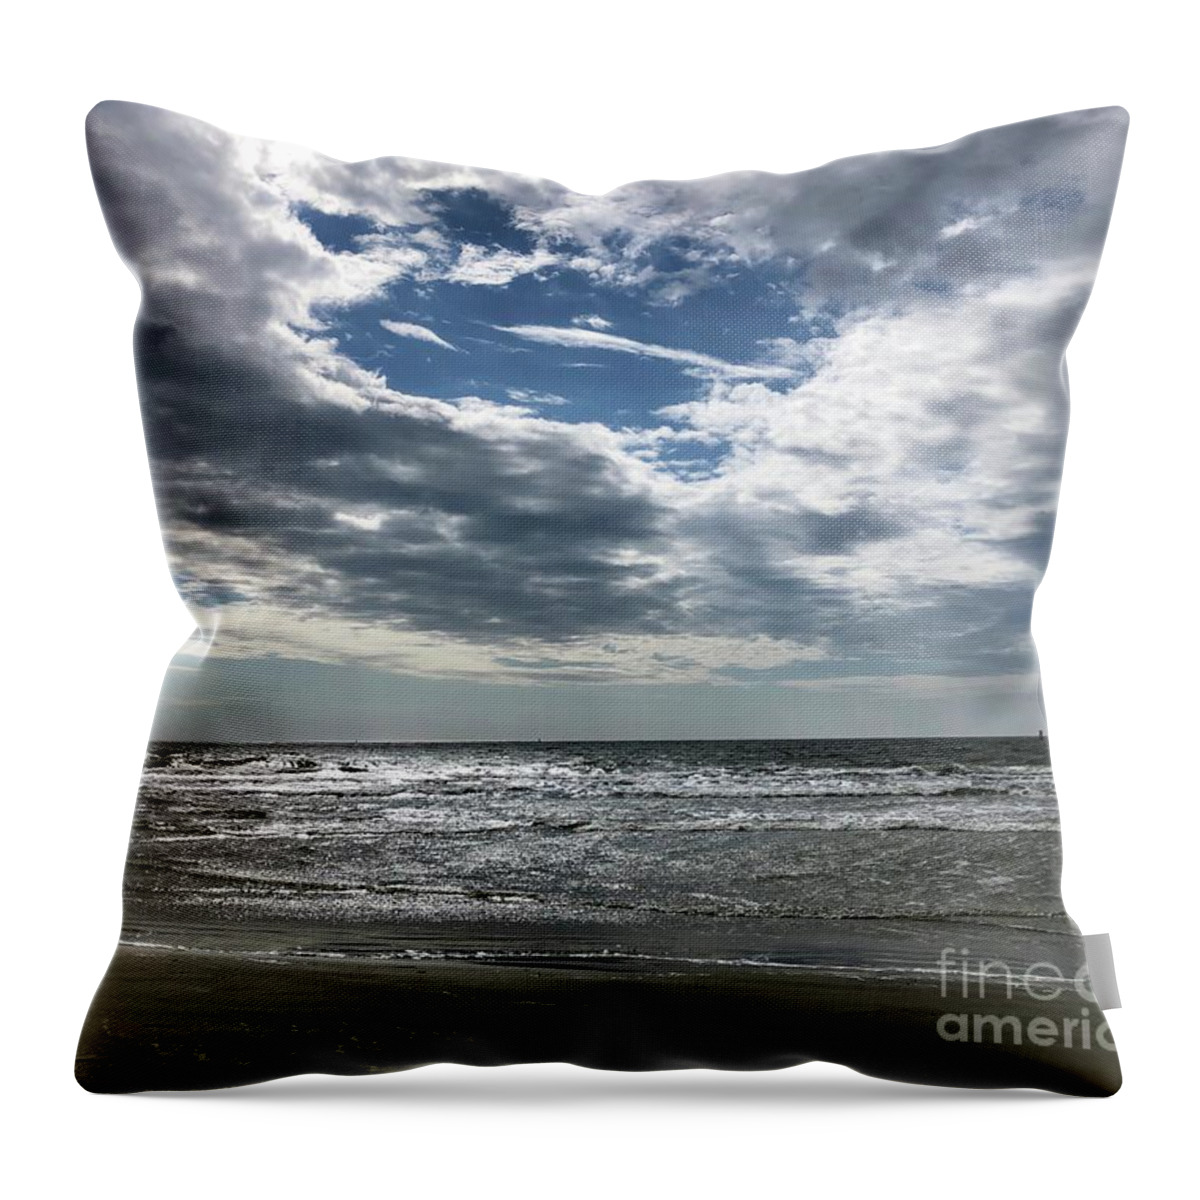 Stormy Sea Throw Pillow featuring the photograph Stormy Evening by Flavia Westerwelle